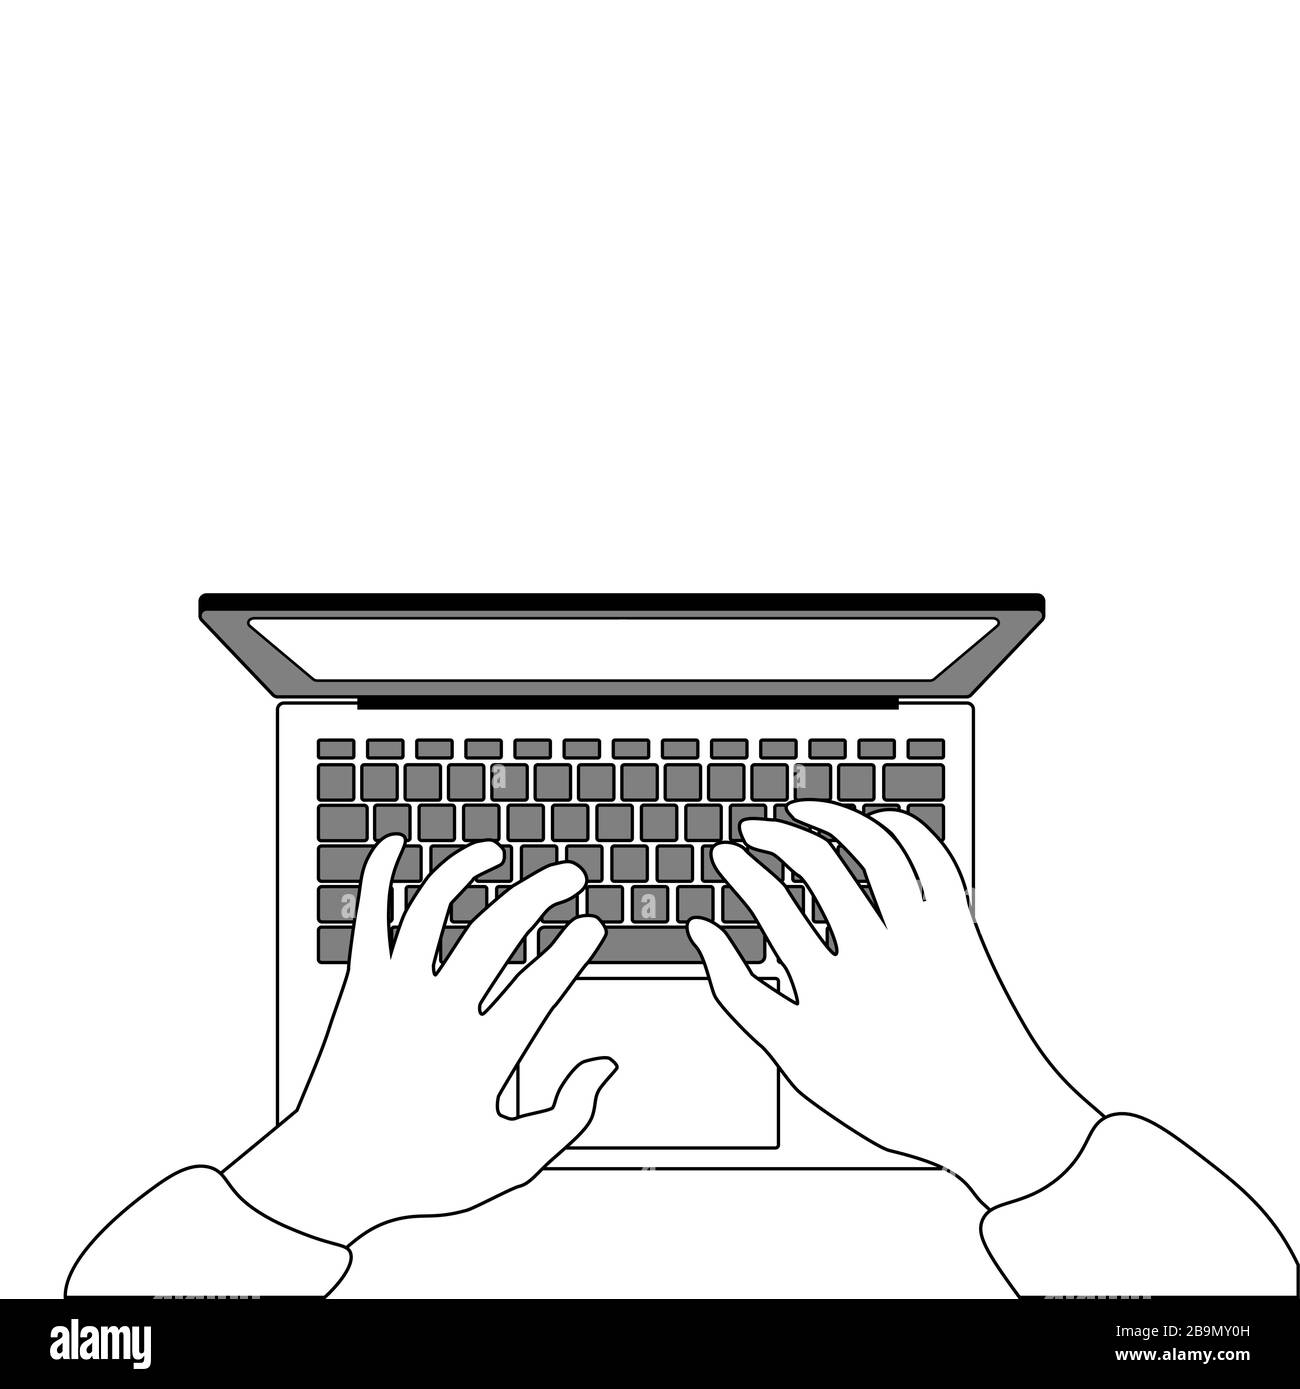 Working from home or remotely: hands typing on laptop. Digital drawing can be used in greeting cards, posters, flyers, banners, logos, web design, etc. Vector illustration. EPS10 Stock Vector